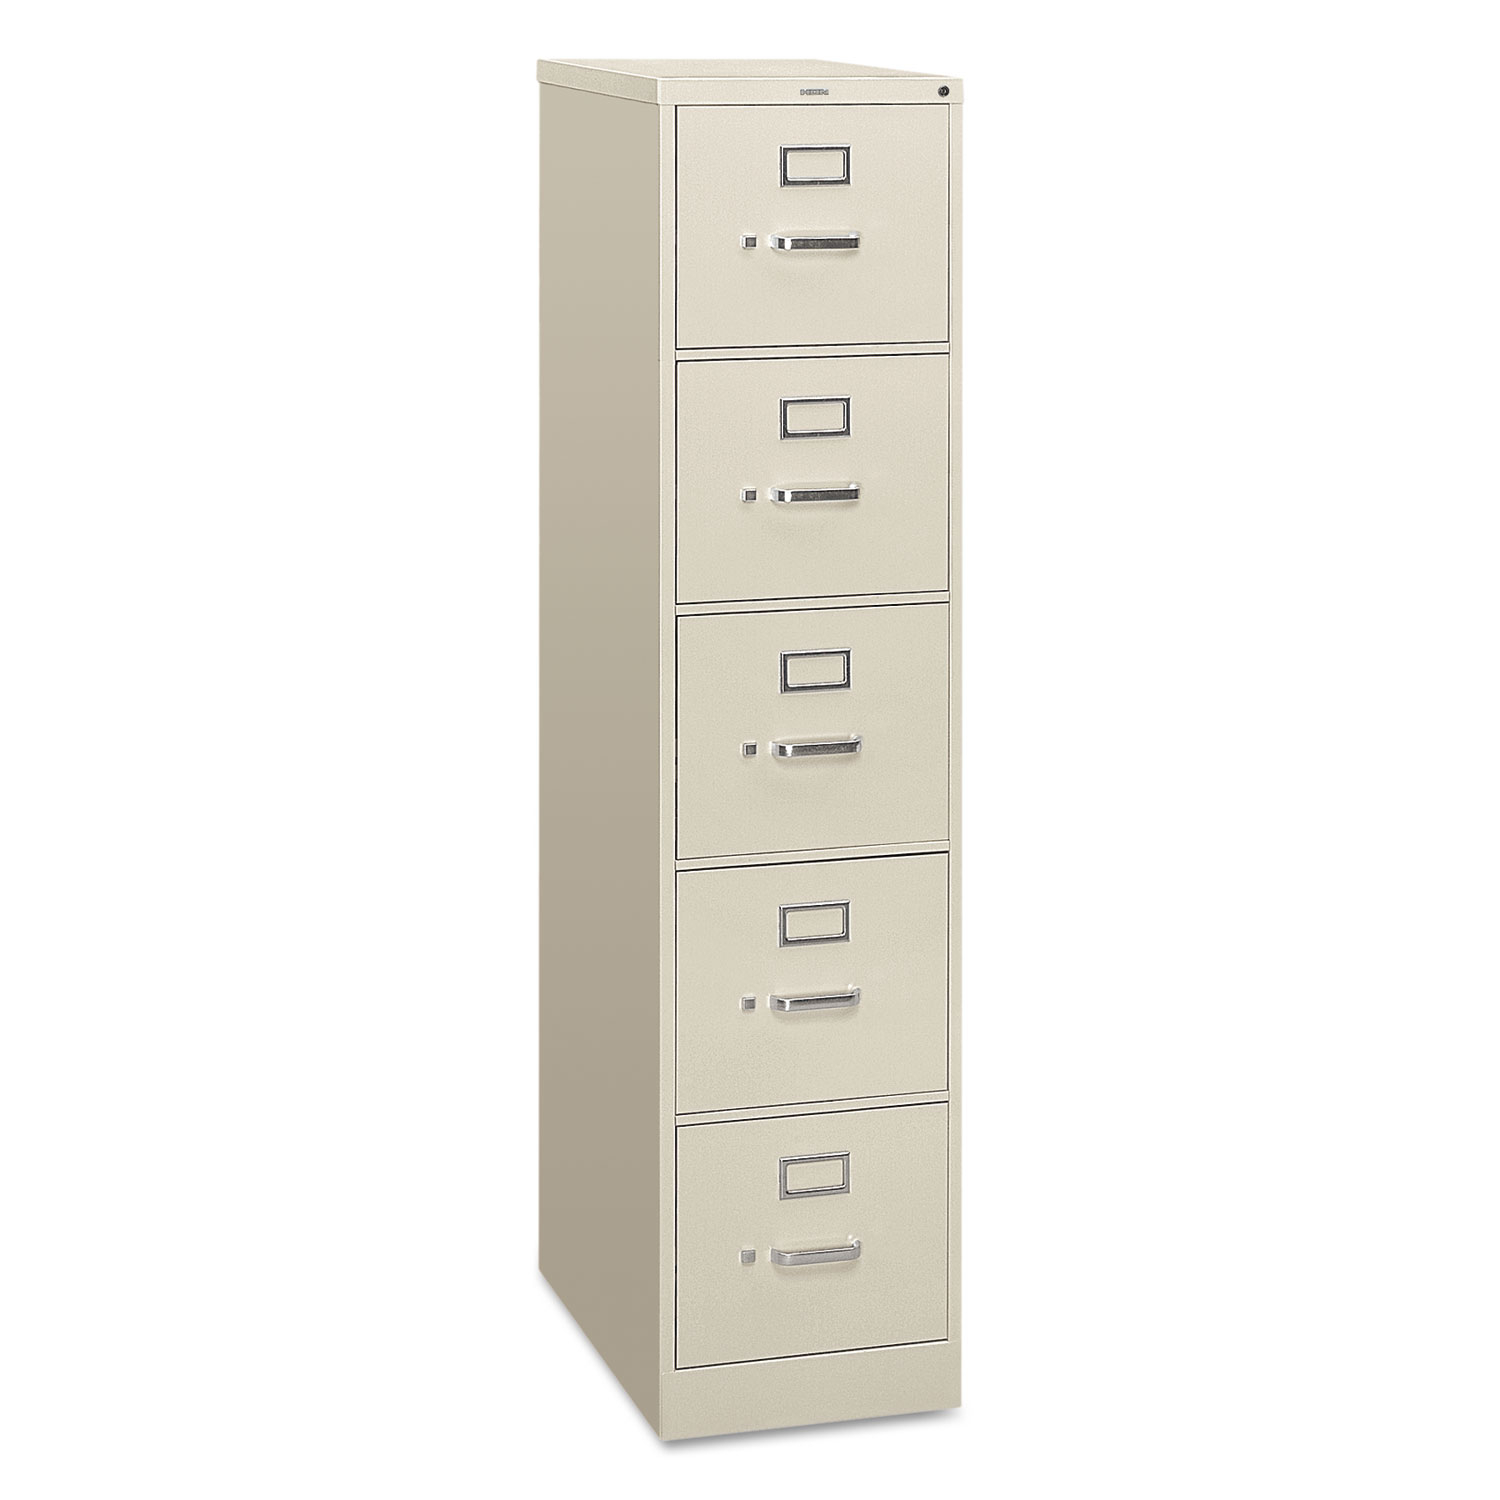 Hon 310 Series 5 Drawer Vertical Metal File Cabinet Letter 60 in proportions 1500 X 1500